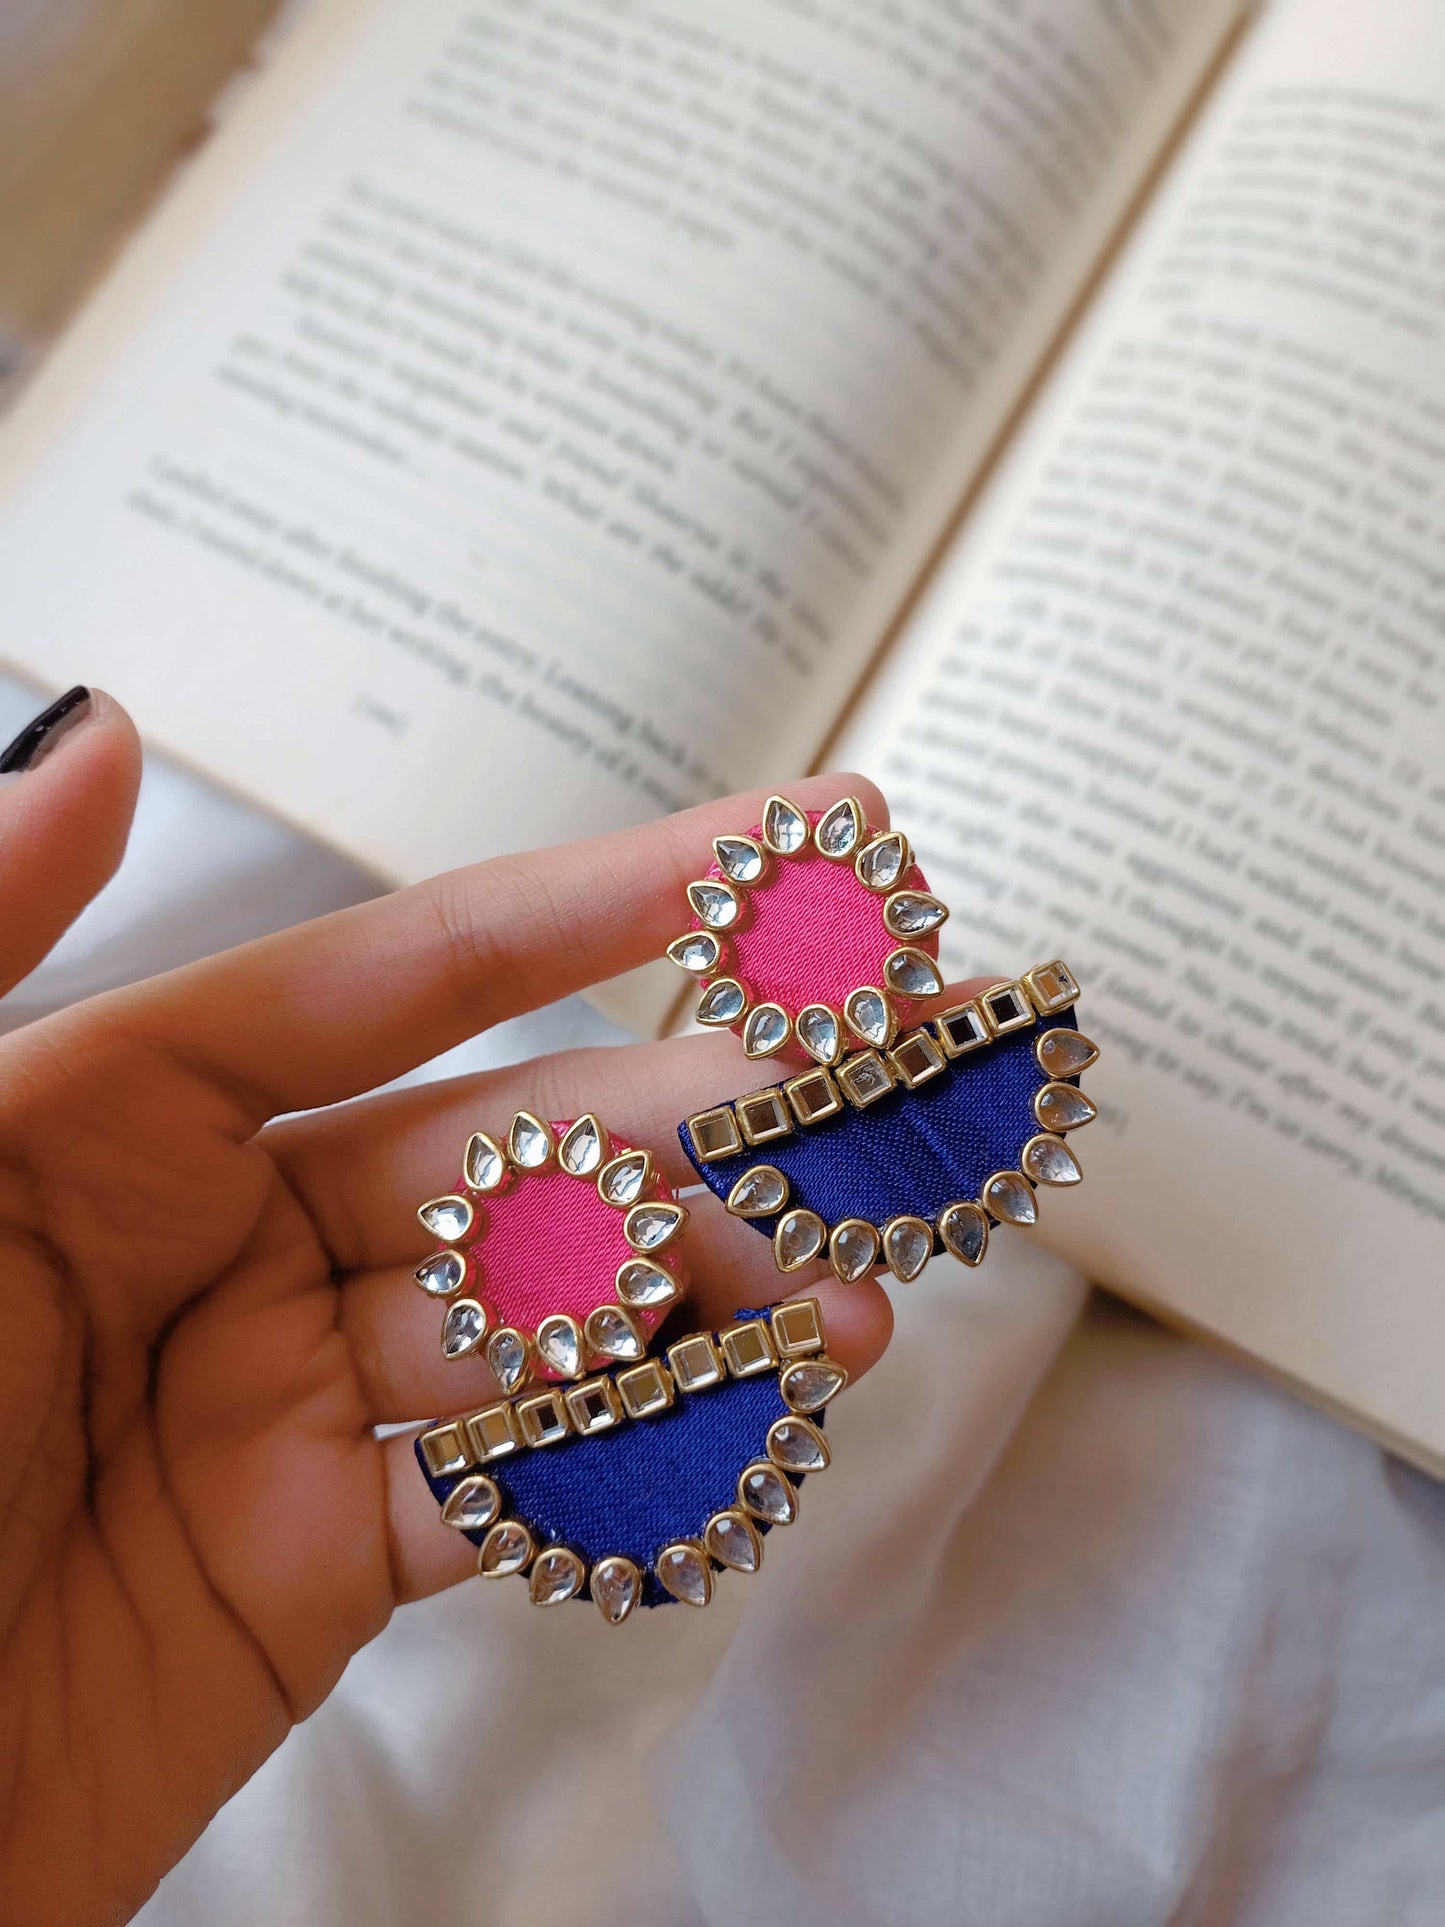 Fingers holding Pink and blue round and semi circle earrings with kundan border kept on open book backdrop